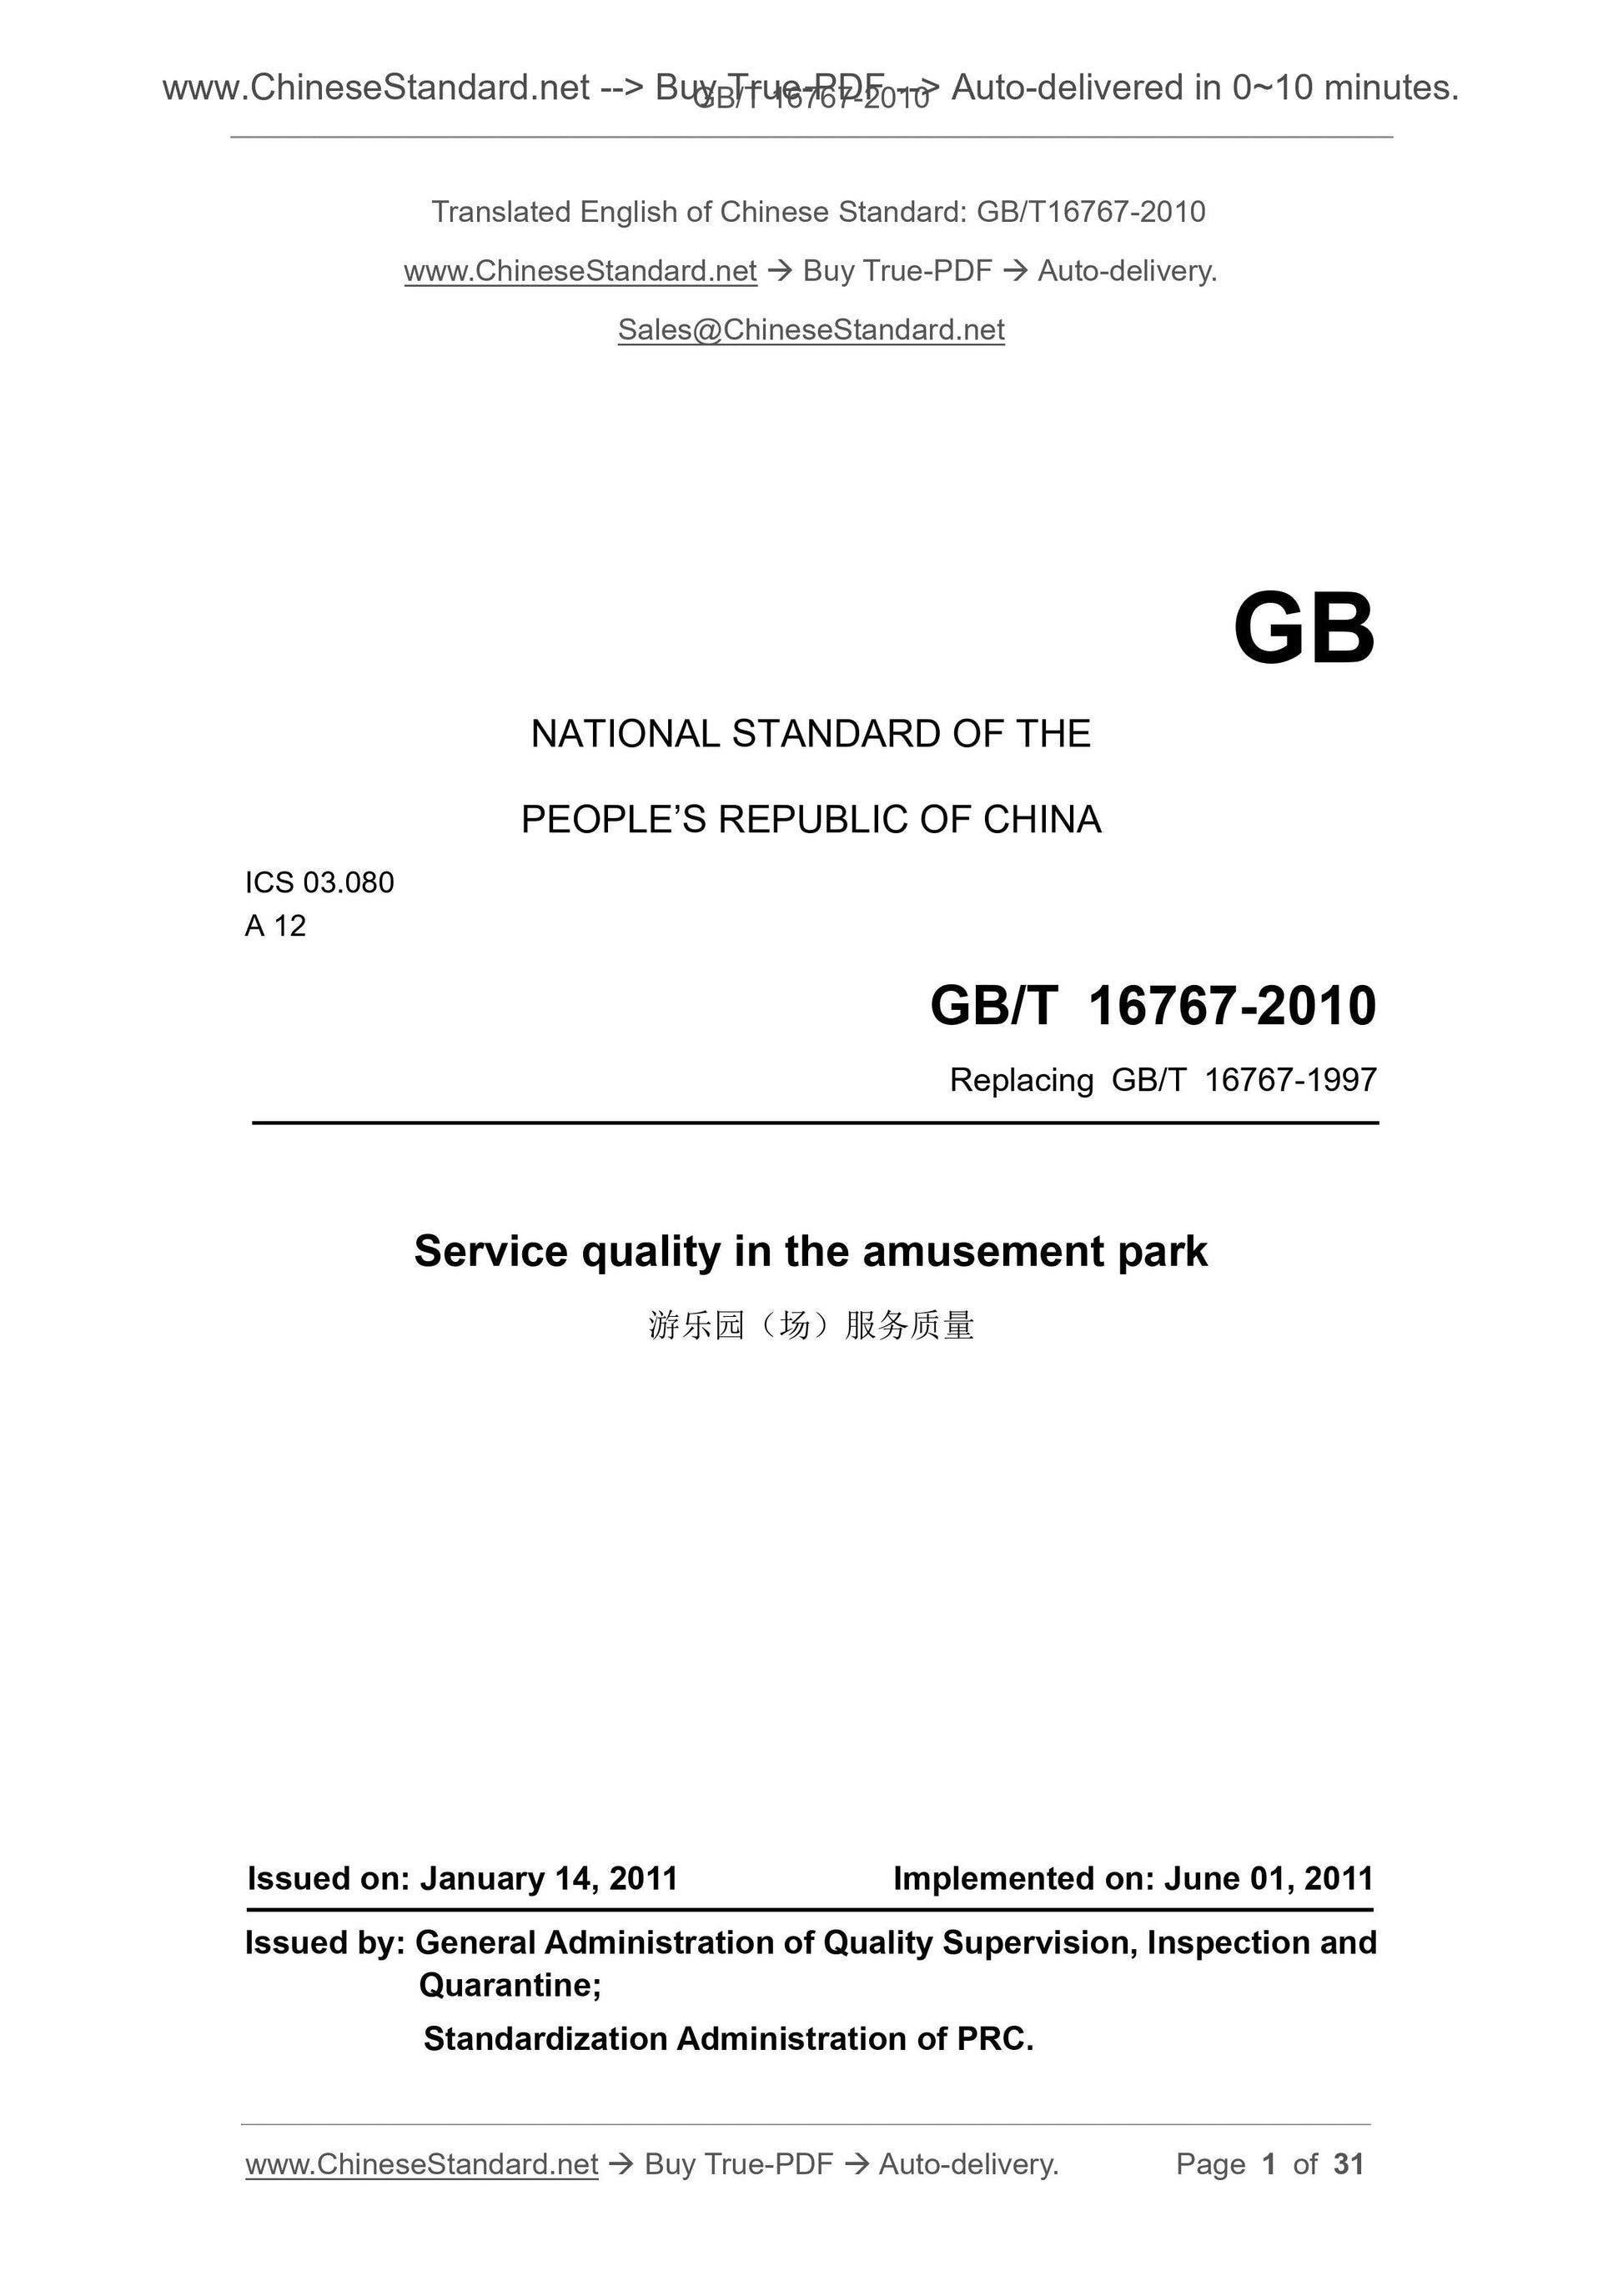 GB/T 16767-2010 Page 1